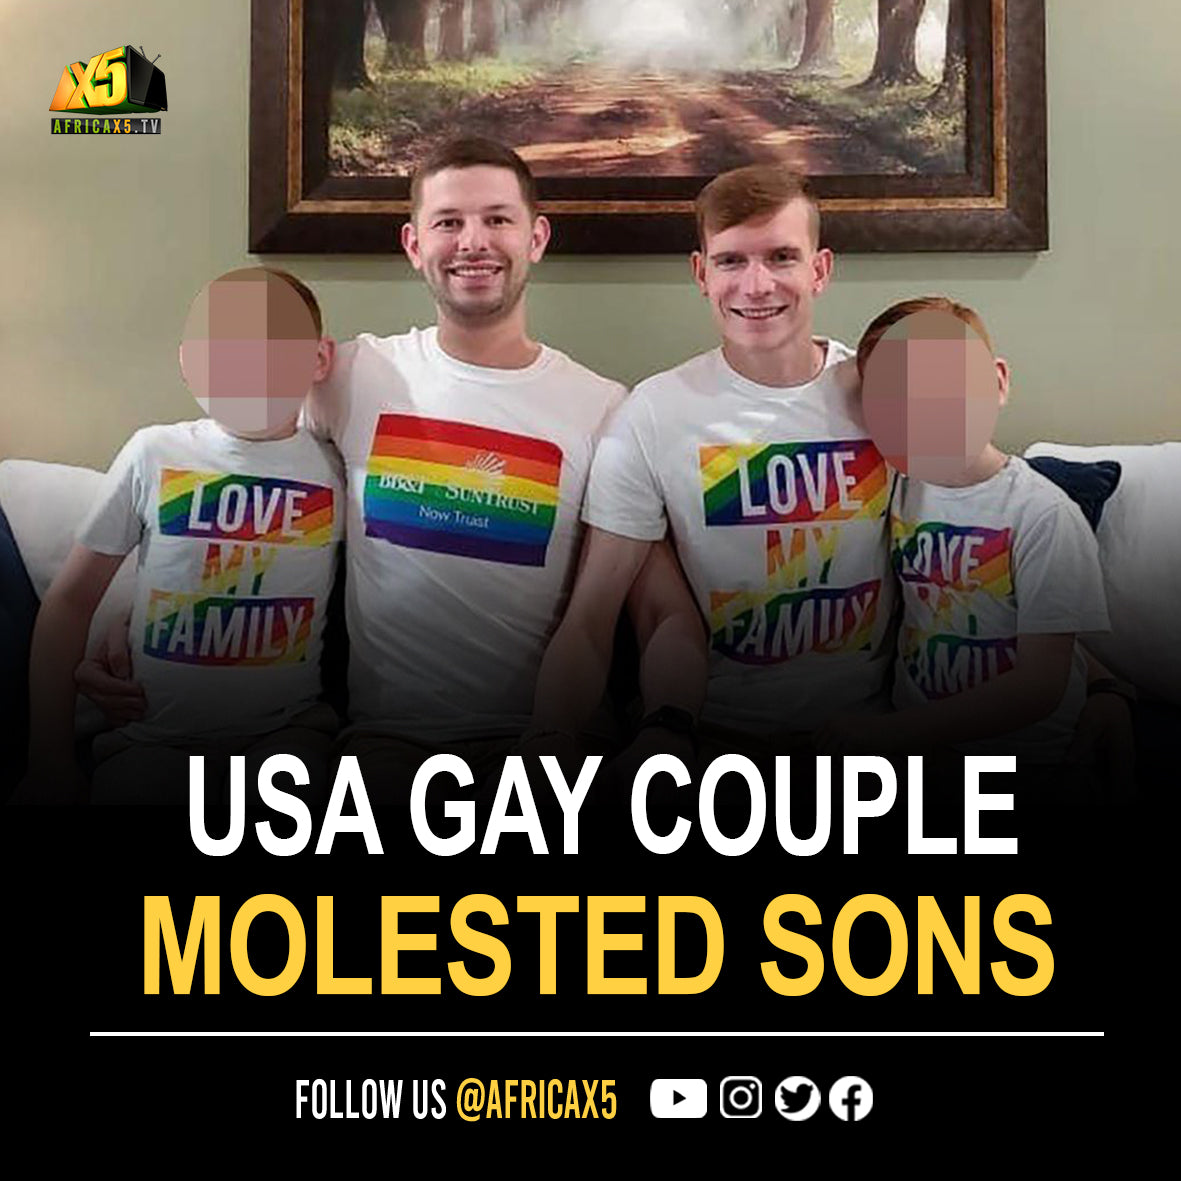 A gay couple from Georgia charged with molesting their two adopted sons and using them to record child porn